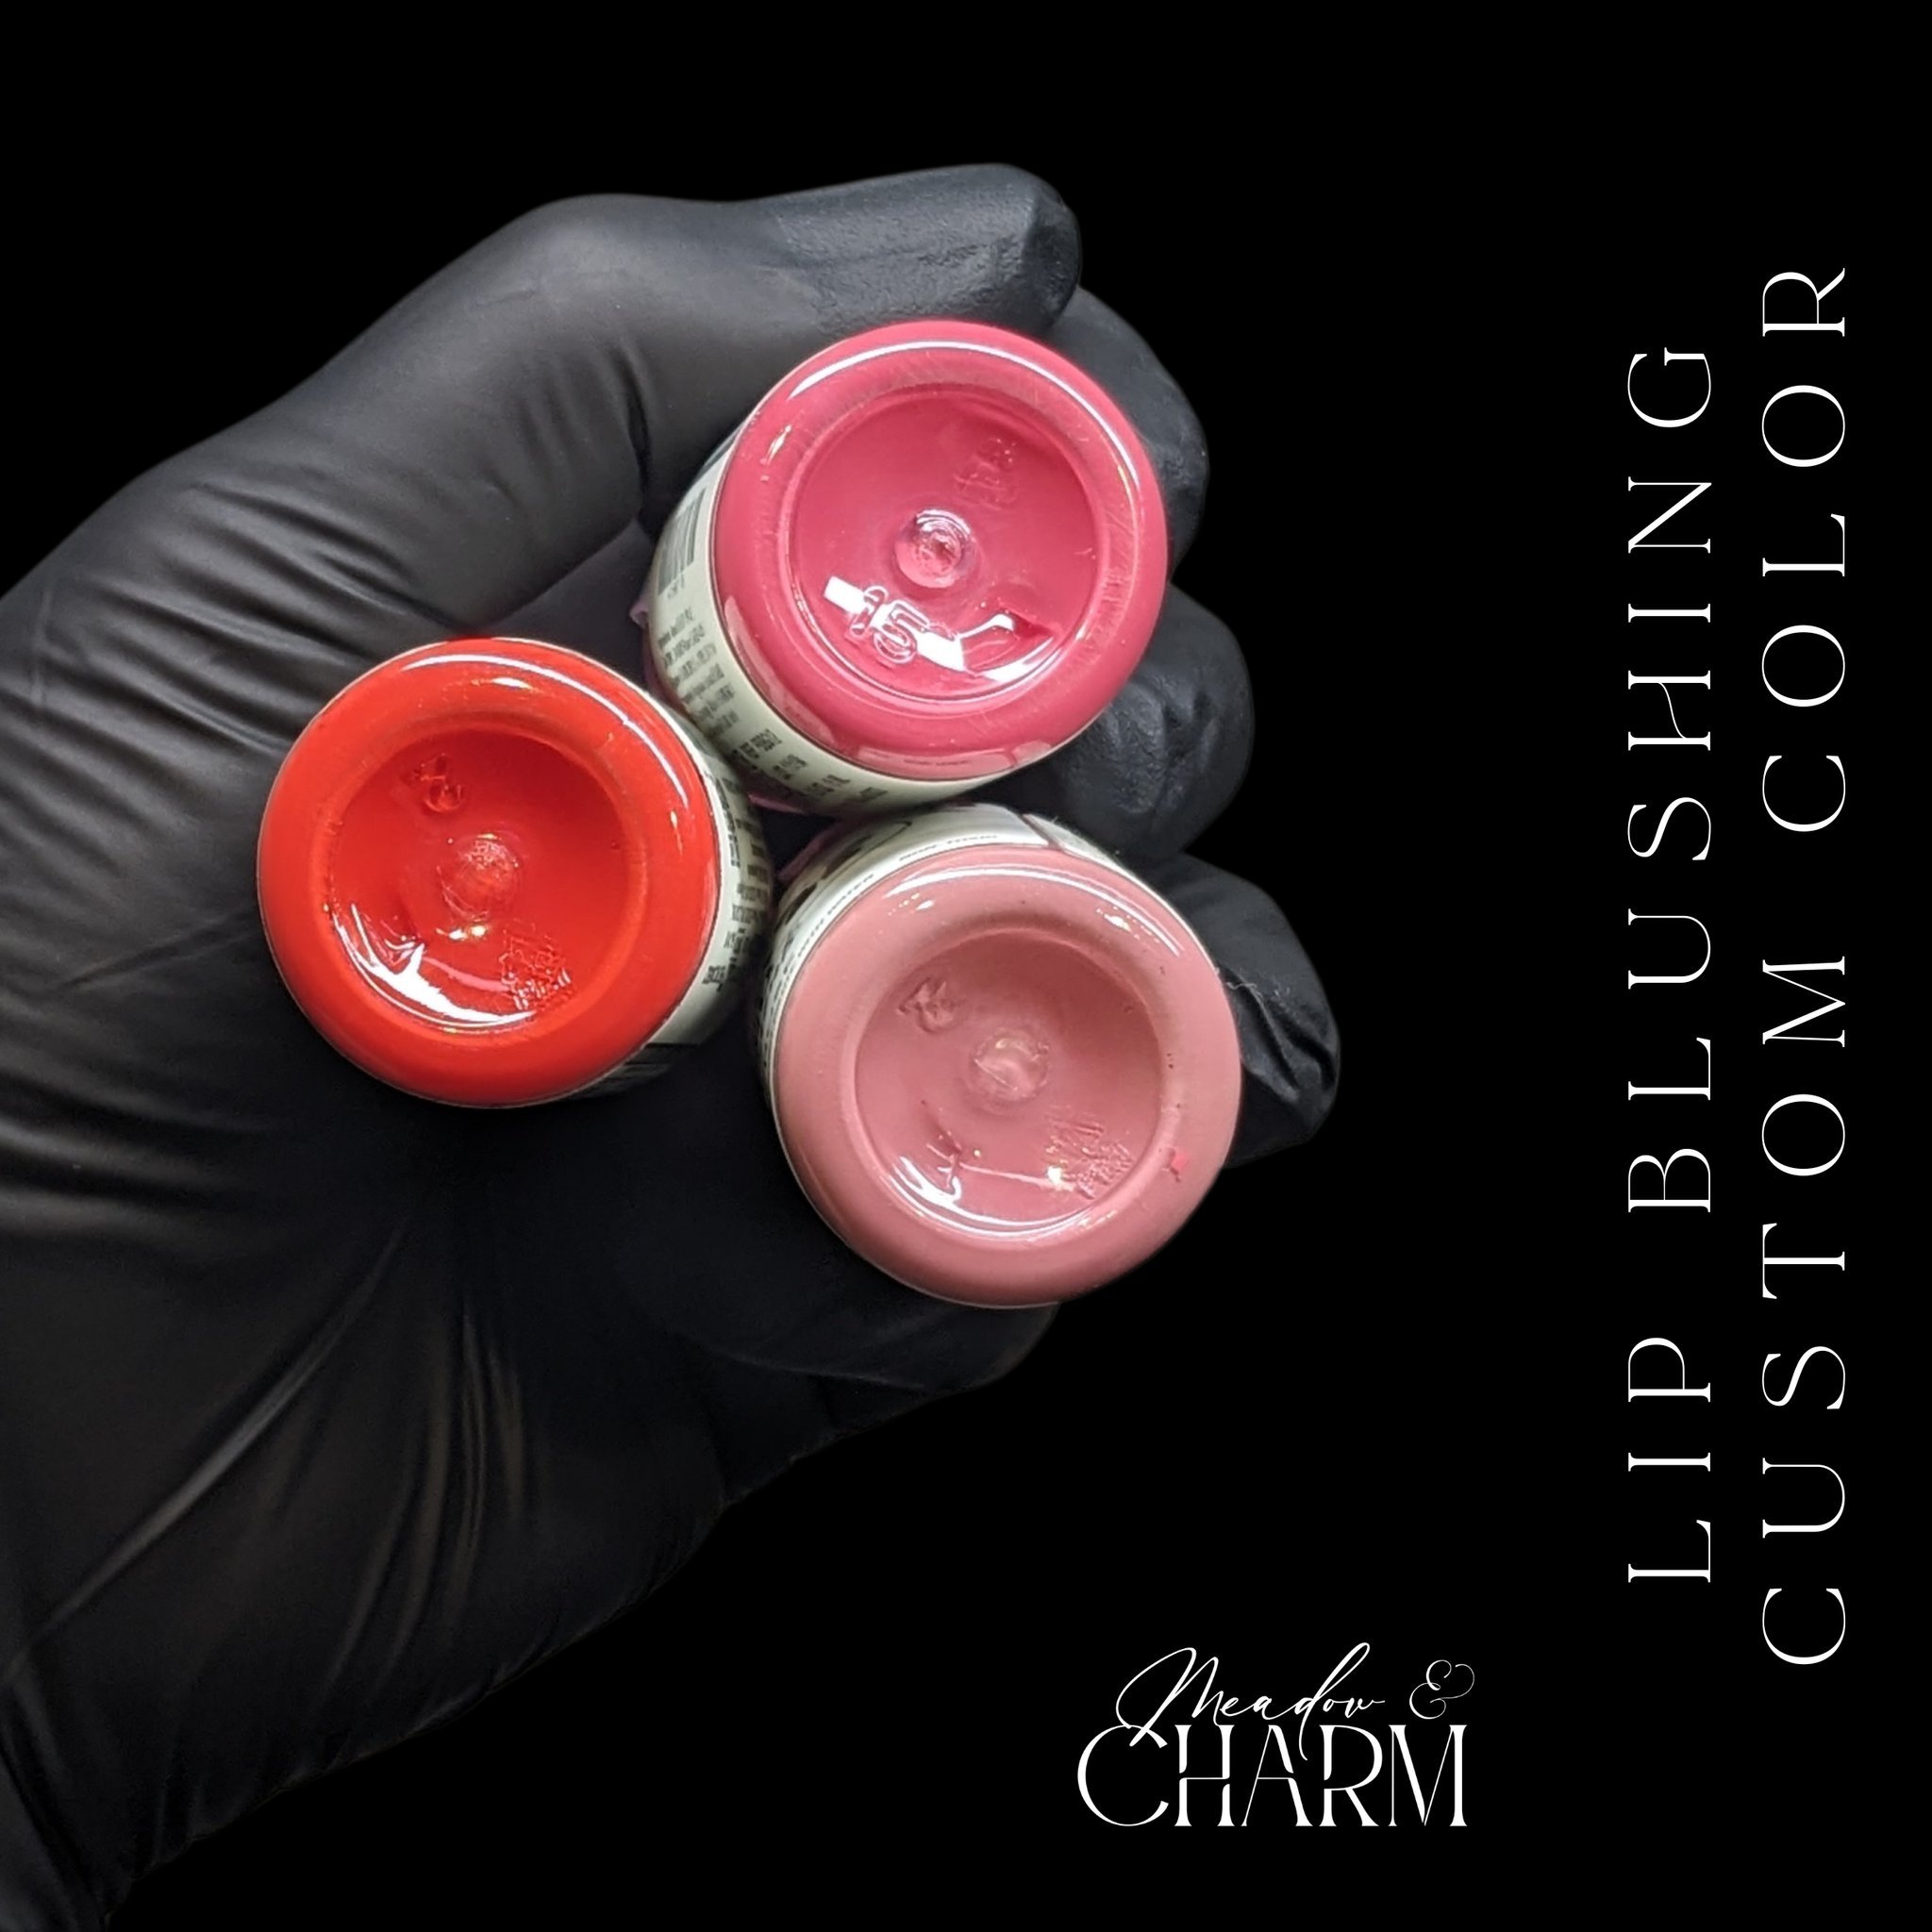 Are you considering lip blushing?! Colors are custom mixed to create your perfect match! 
Book your appointment now at www.meadowandcharm.com
.
.
.
.
.
Permanent makeup lip blushing artist in Council Bluffs and Avoca, IA.